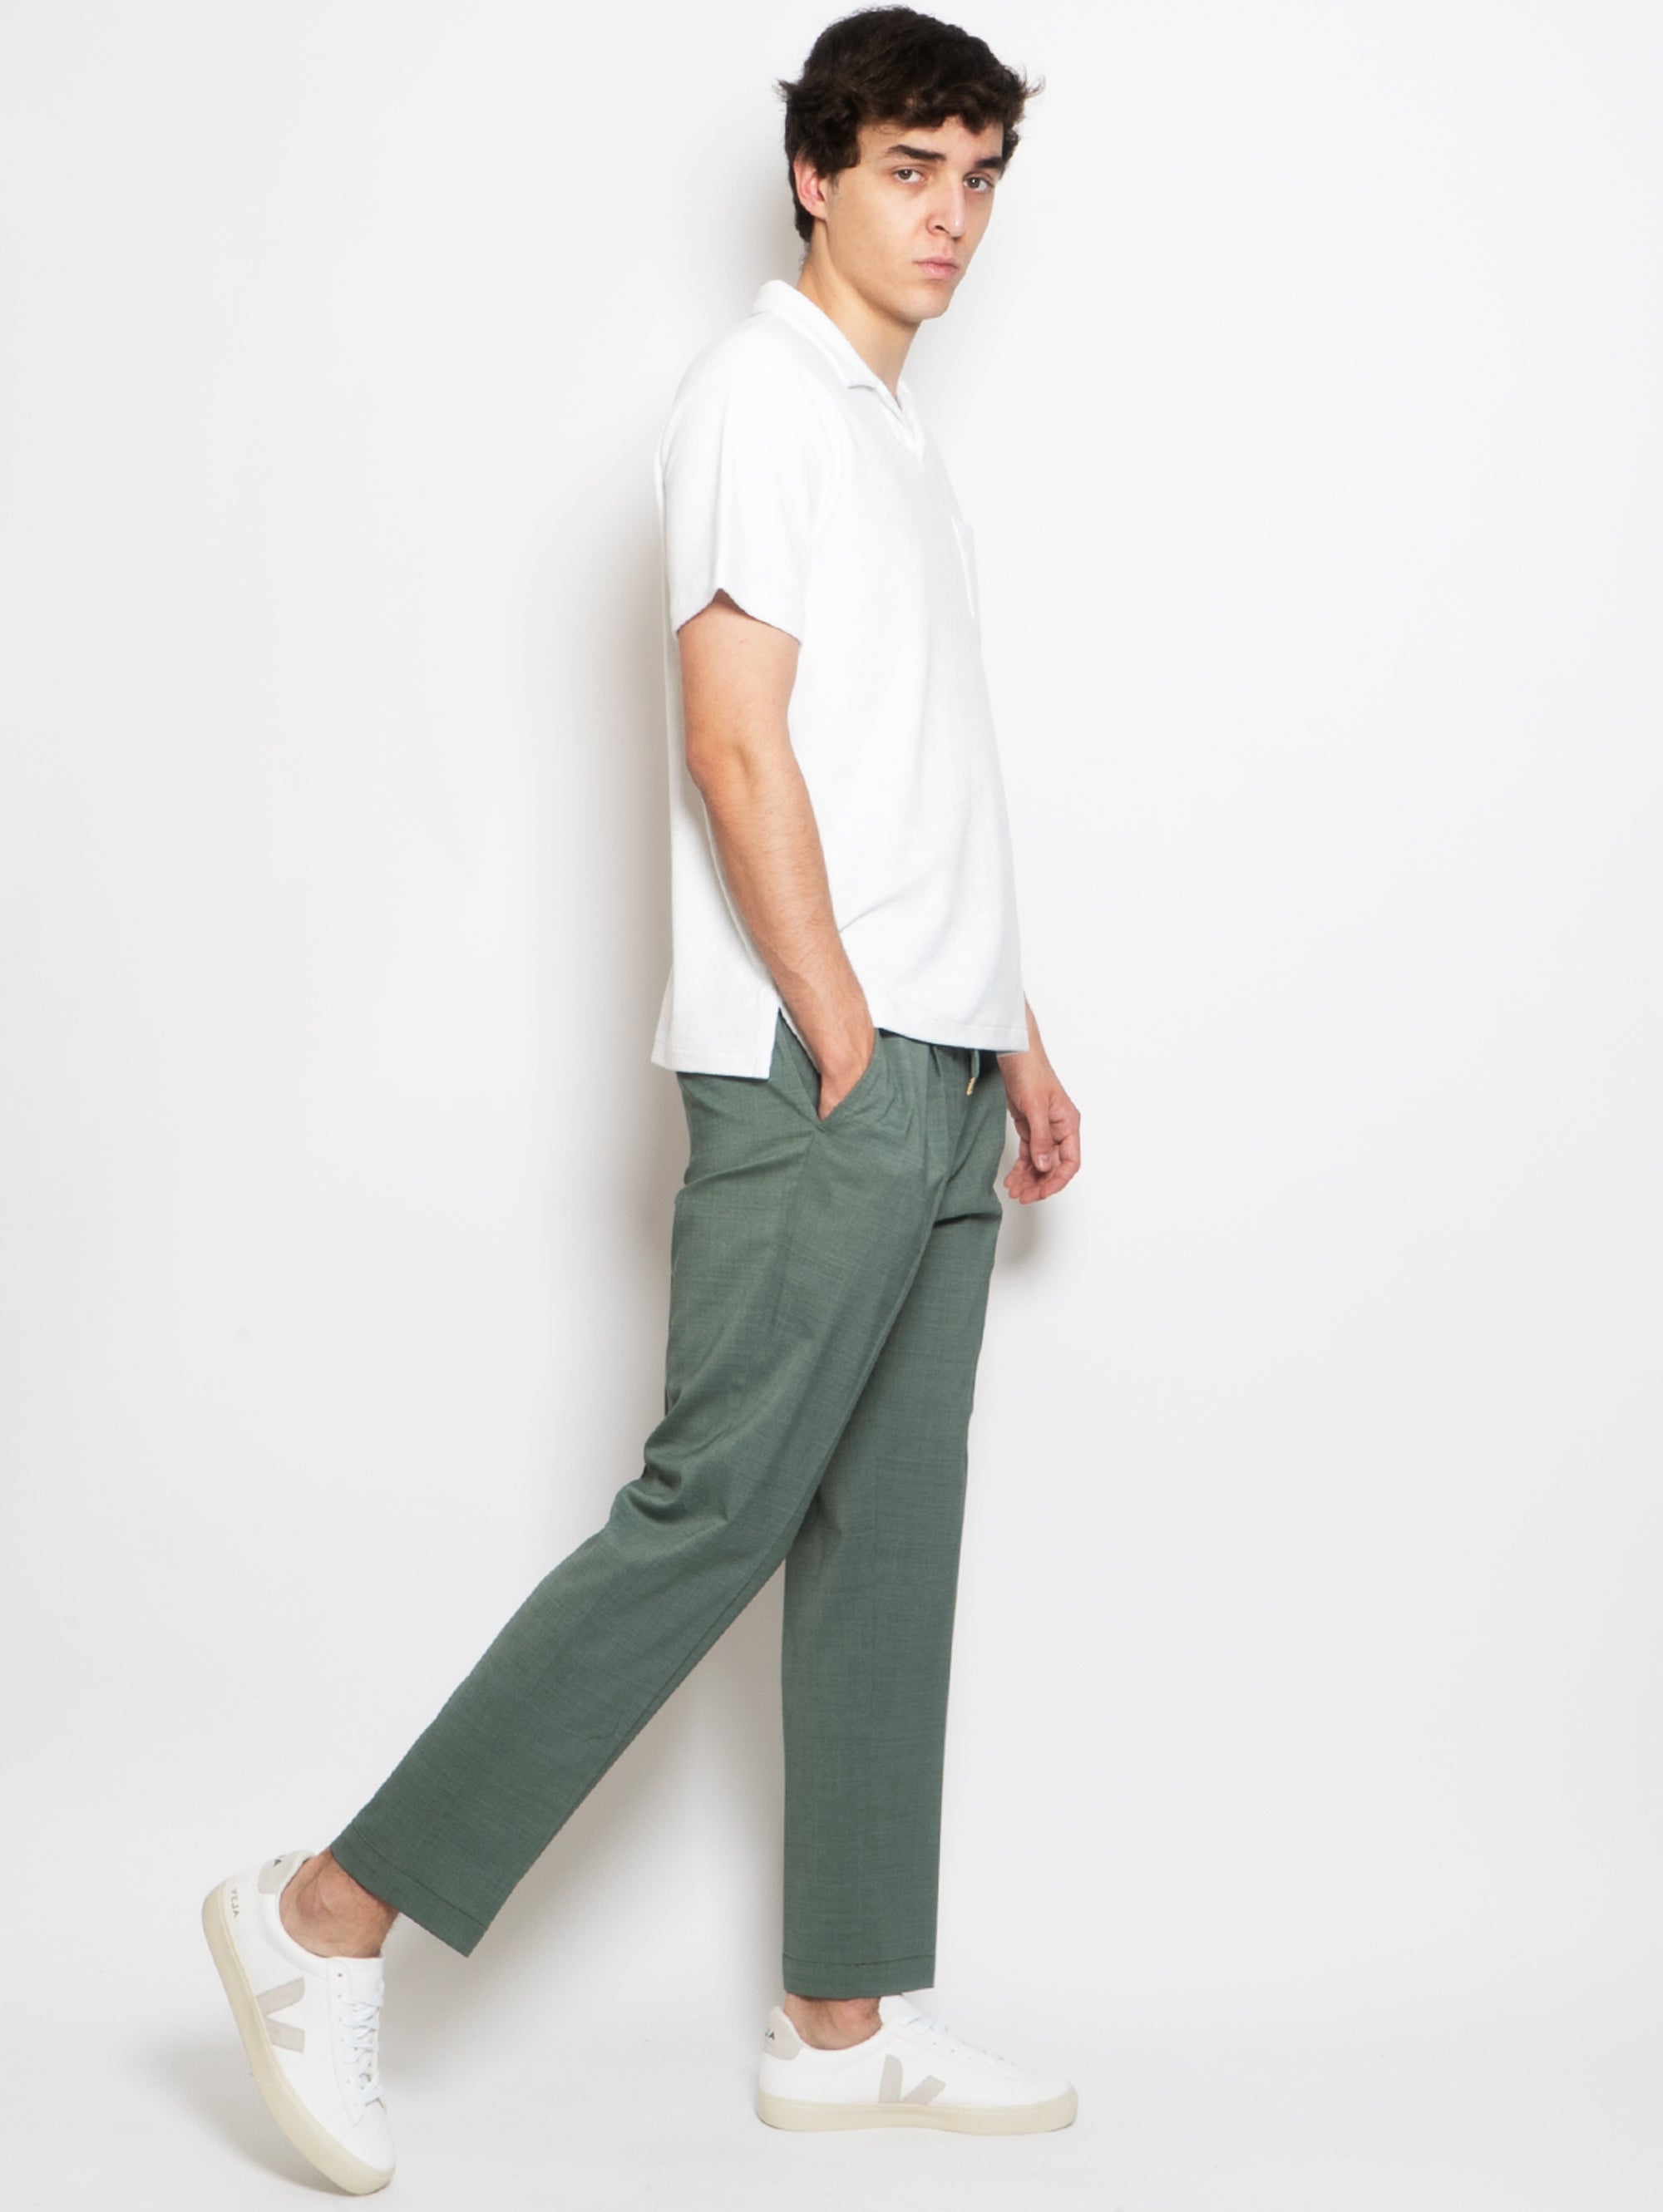 Pants with Drawstring and Pleats in Green Wool Blend